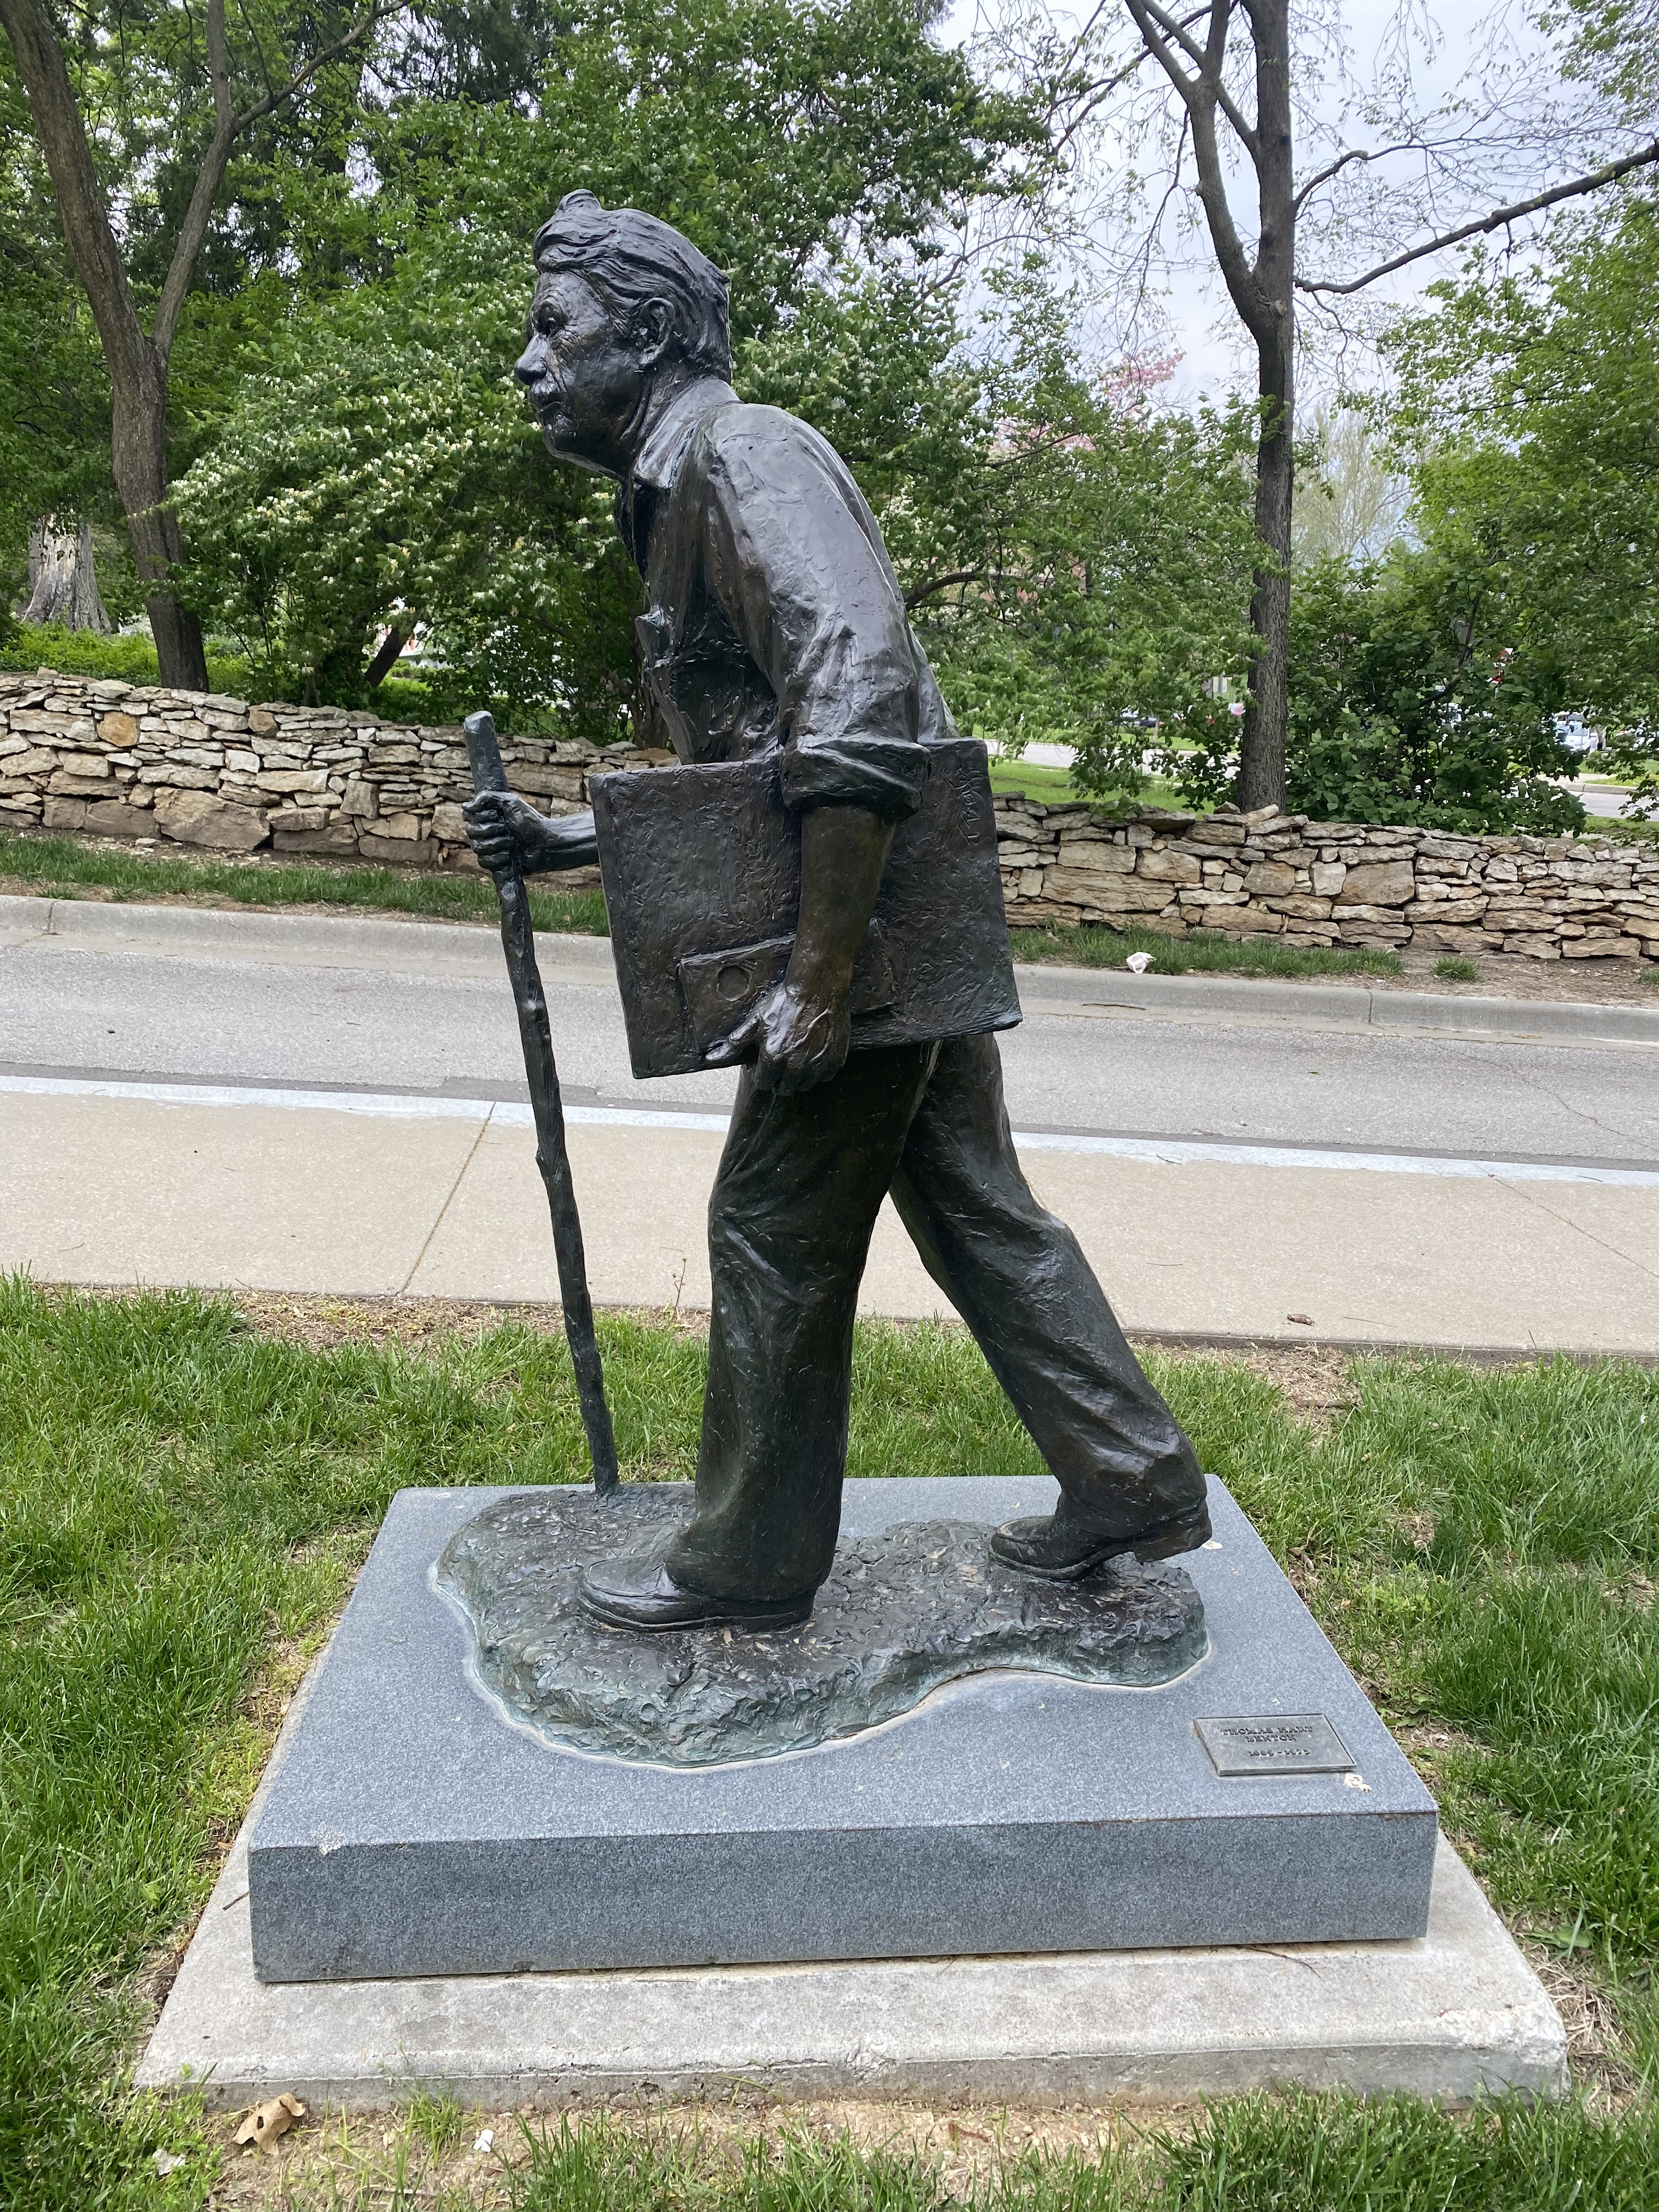 A statue of Benton. He is holding a sketch book and waling with a walking stick.